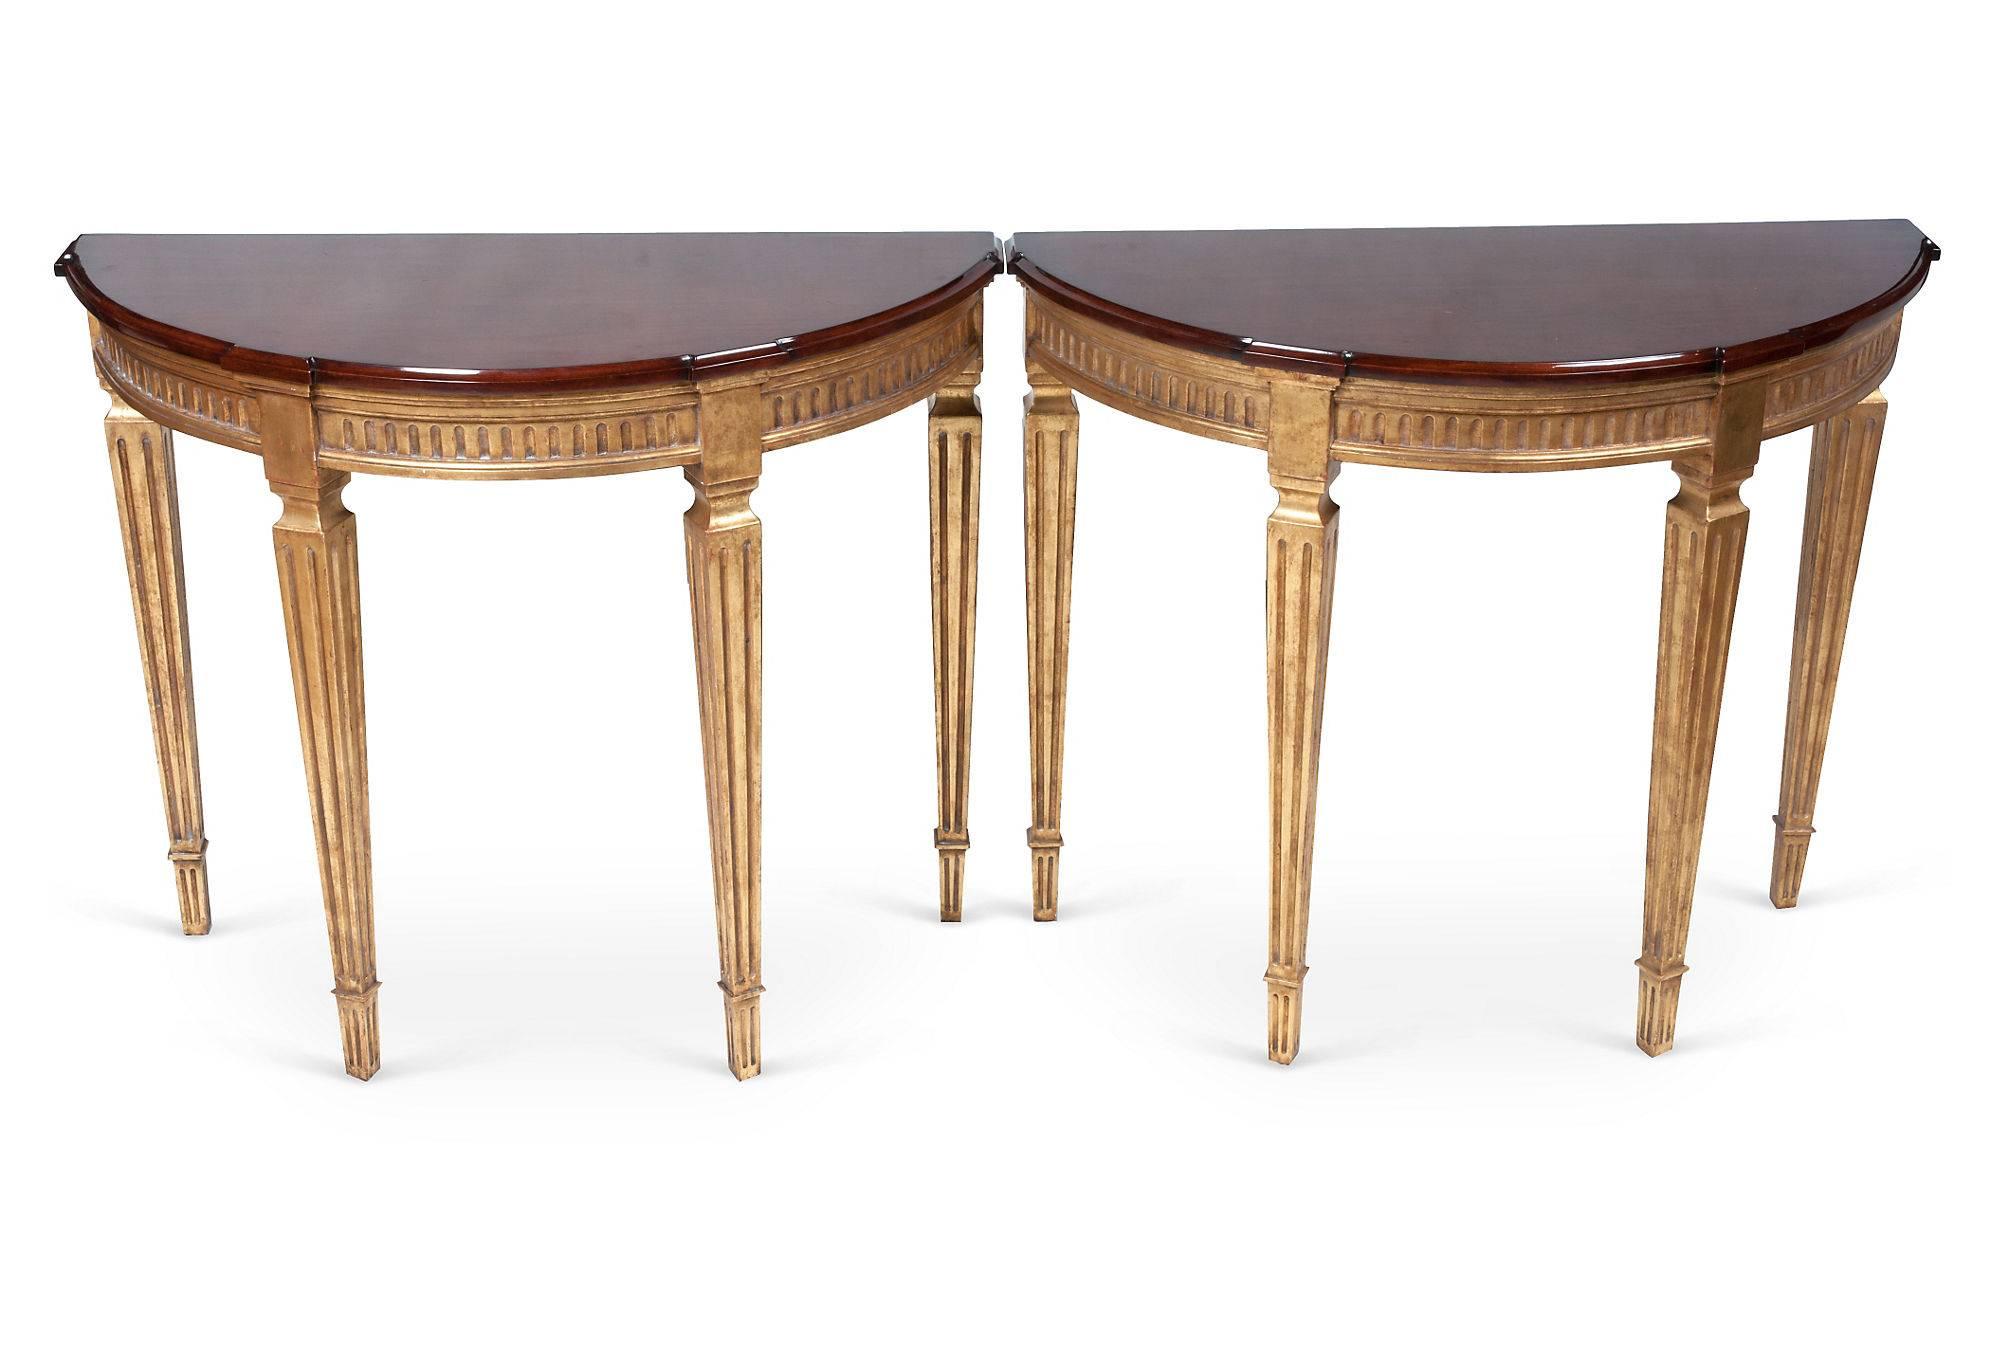 A pair of demilune tables with gold bases and cherrywood tops.